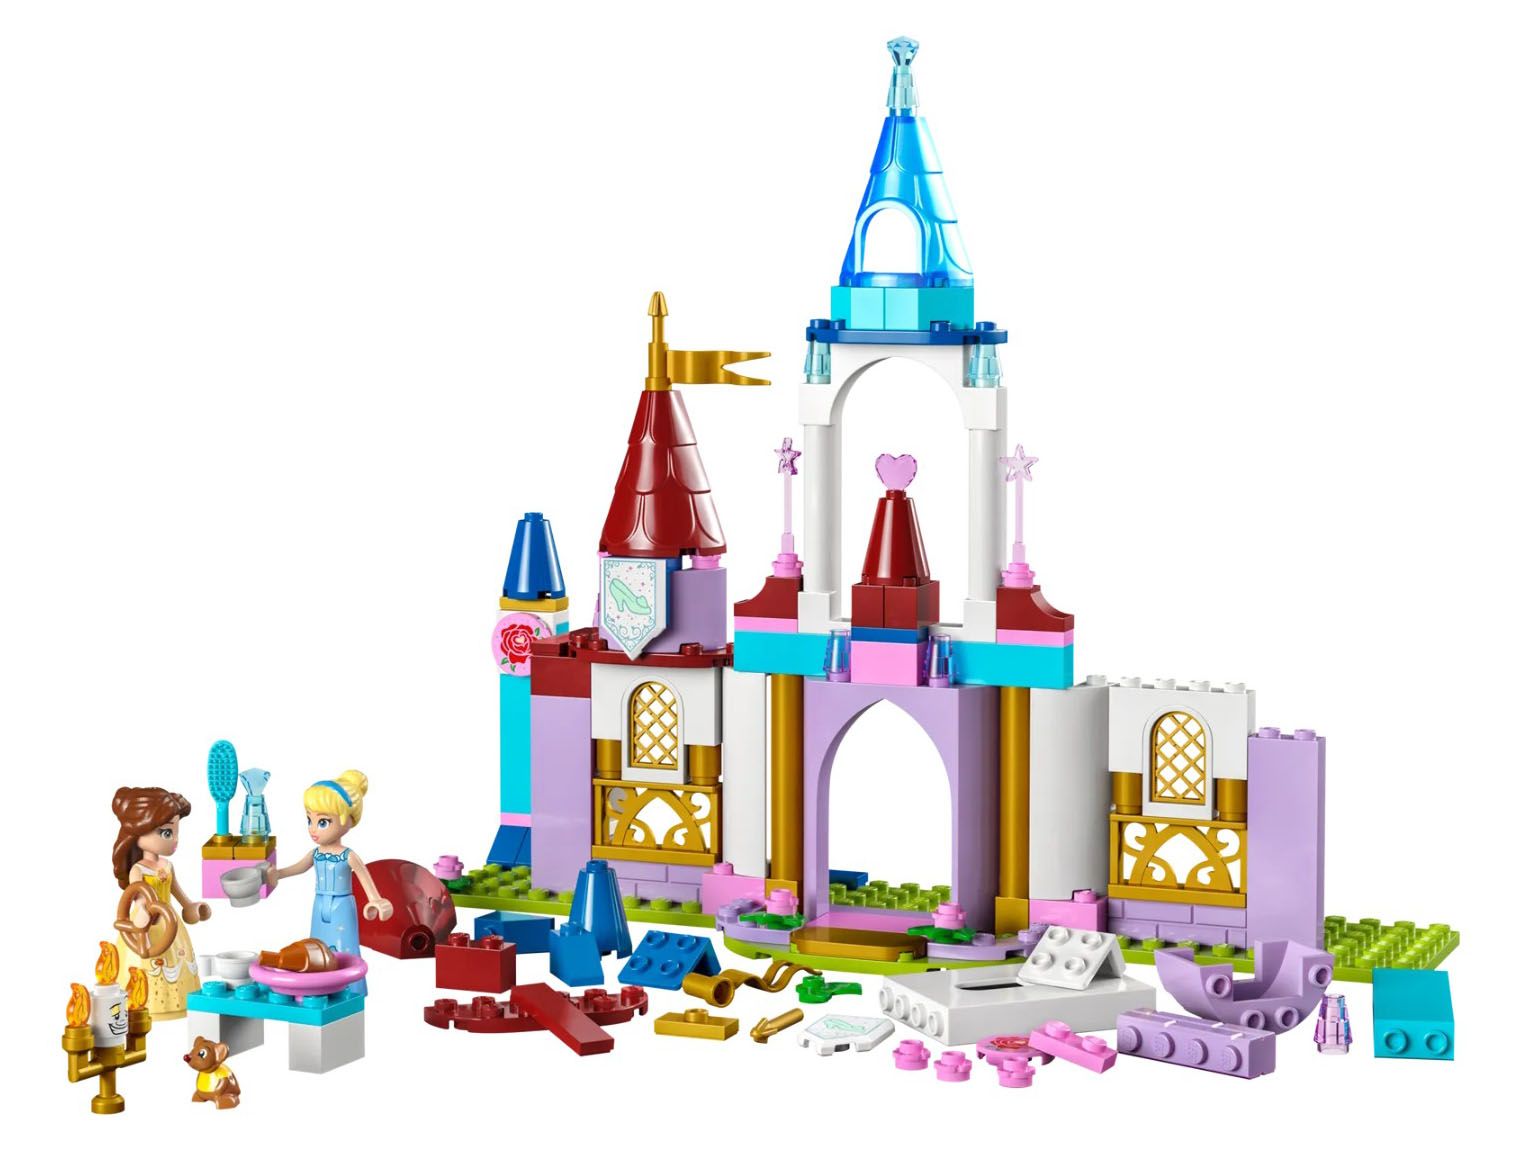 LEGO(R)Disney Princess Castle for March 2023 Officially Revealed | Princess Belle and Cinderella included | Release Date March 1 2023